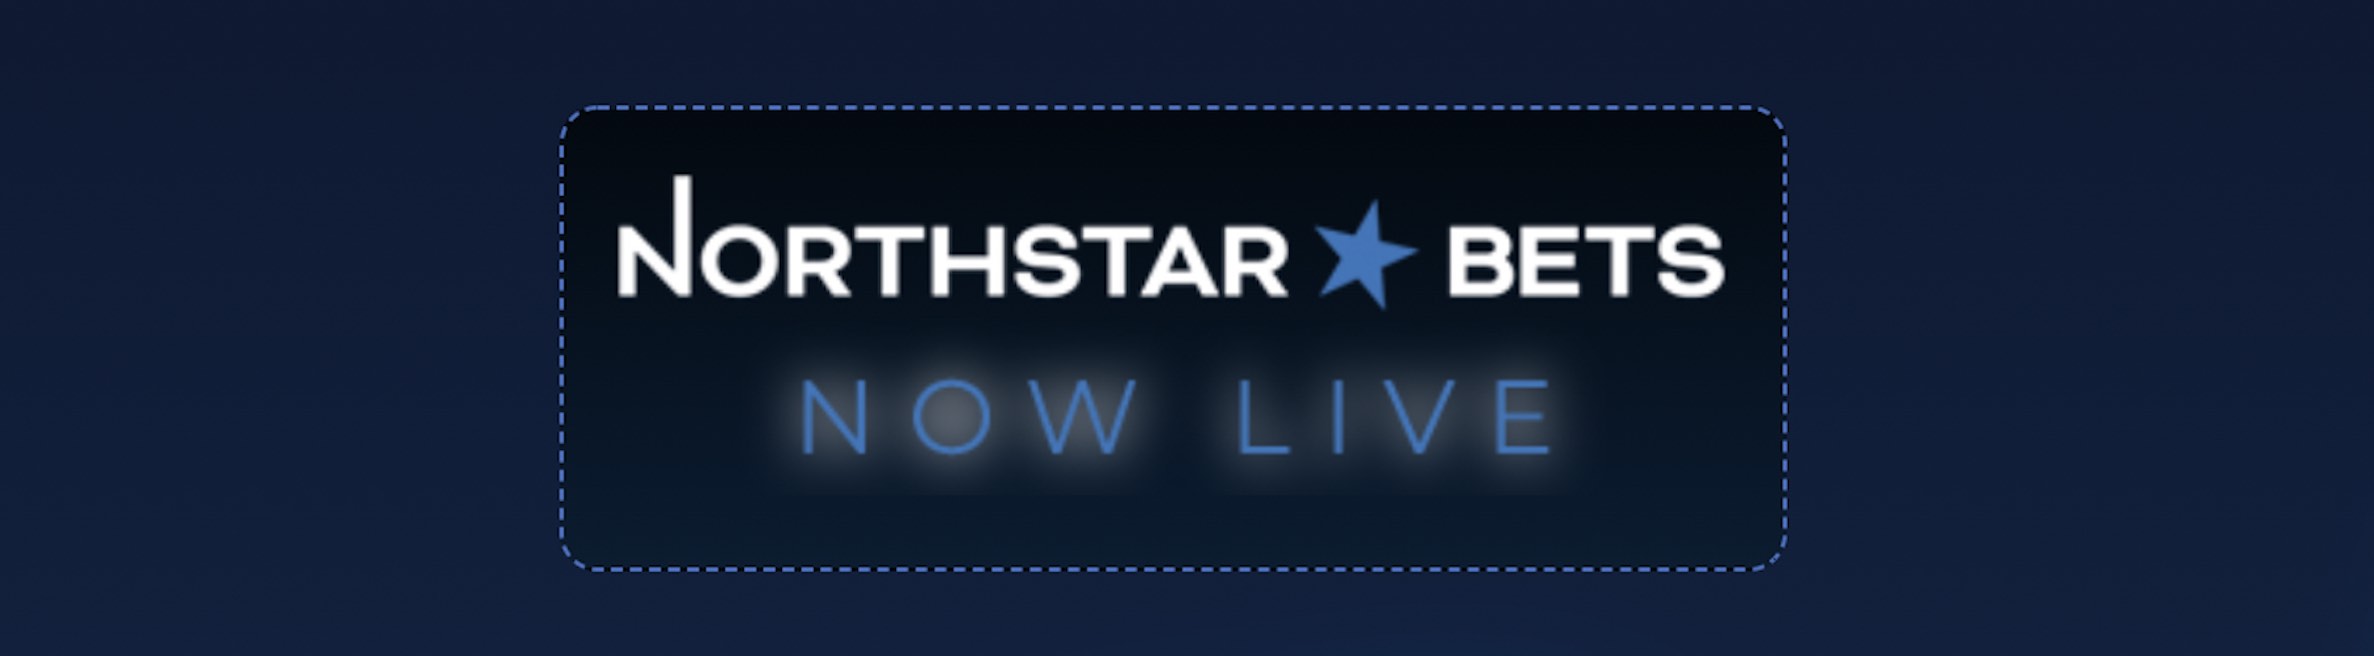 NorthStar Bets Goes Live